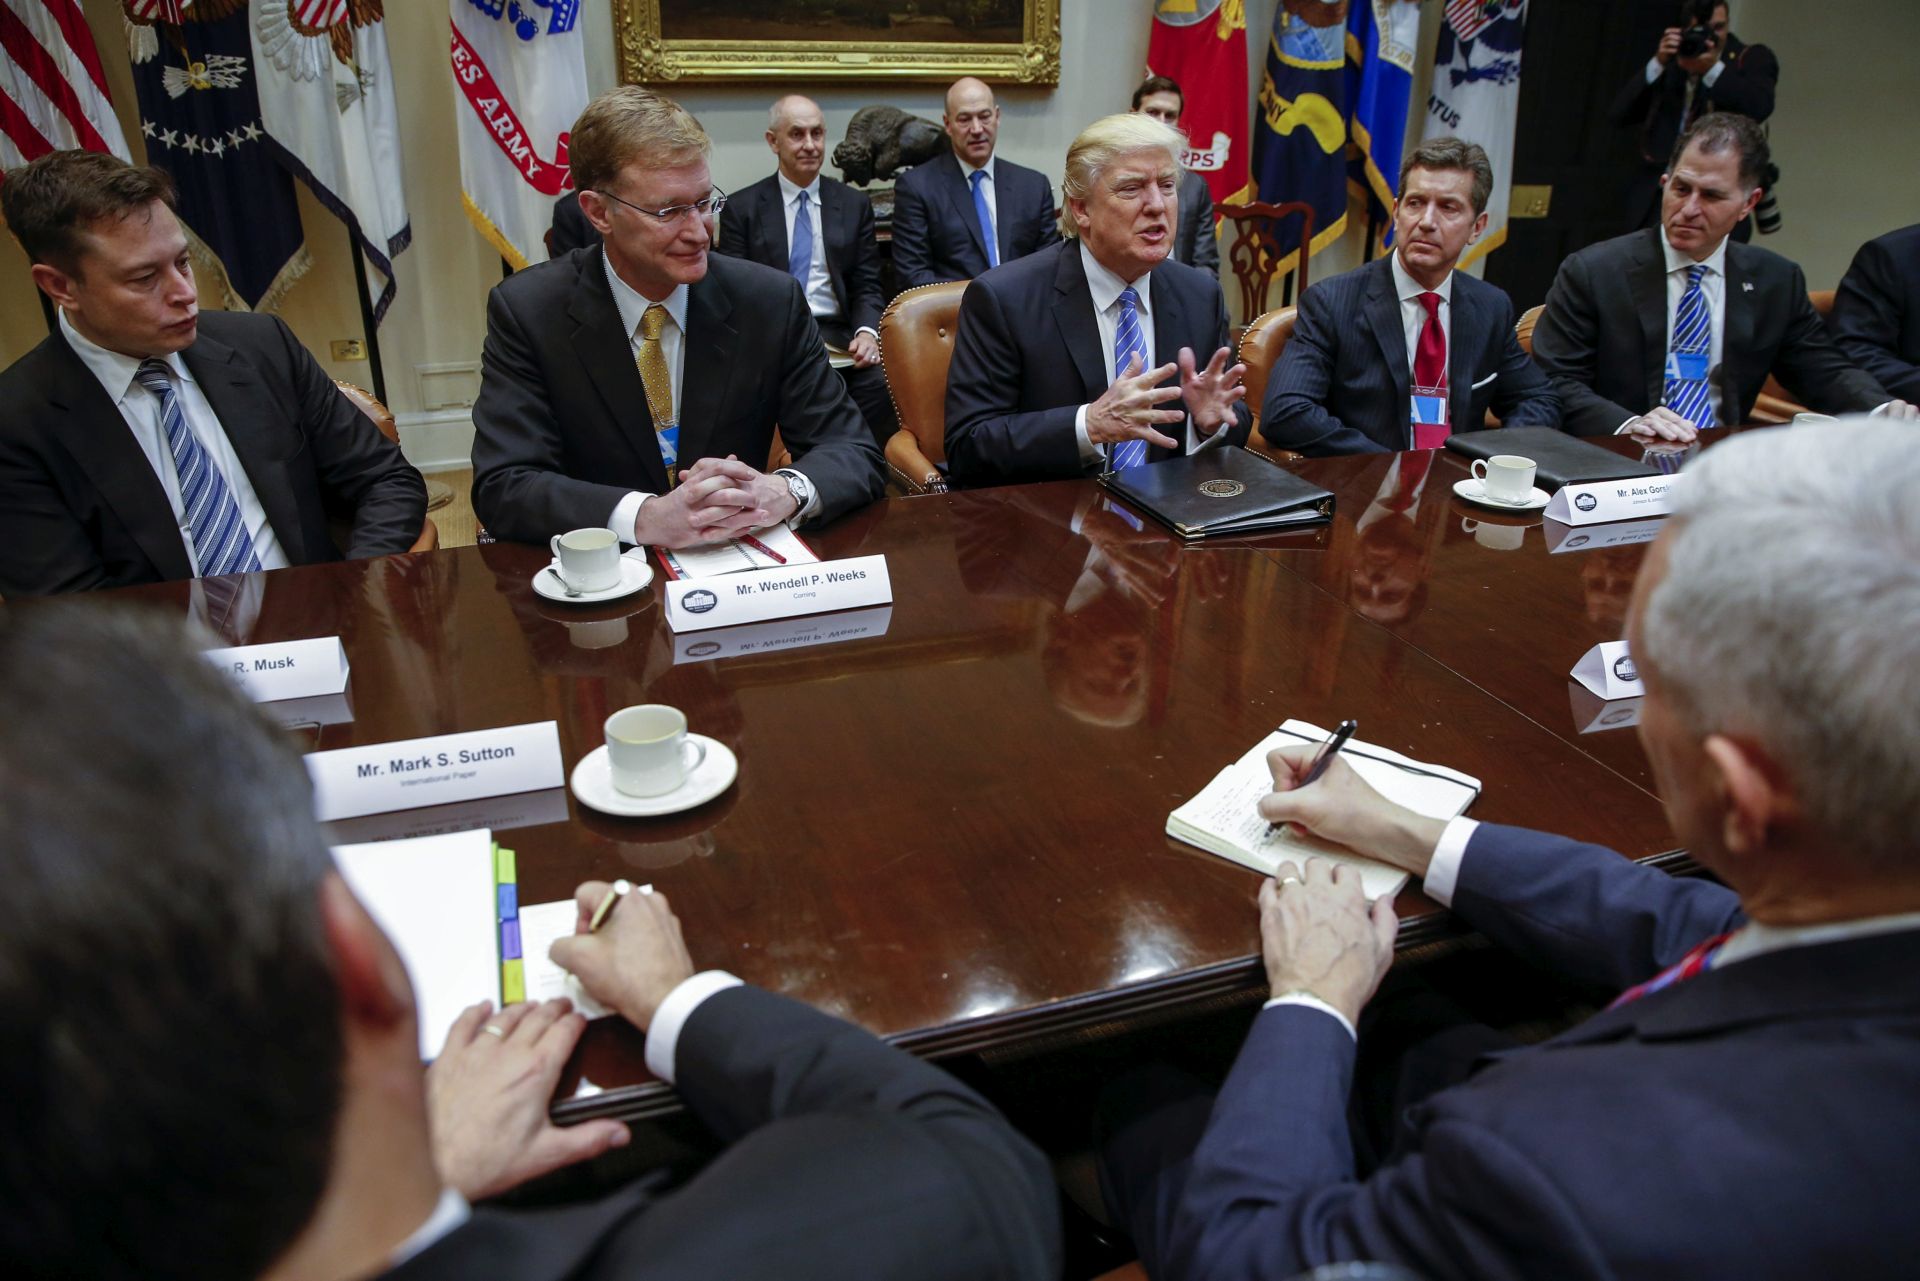 epa05744611 US President Donald J. Trump (C), with the Tesla and Spacex CEO Elon Musk (L), CEO of Corning Wendell Weeks (2-L), CEO of Johnson & Johnson Alex Gorsky (2-R) and CEO of Dell Technologies Michael Dell (R), delivers remarks in a meeting with business leaders in the Roosevelt Room of the White House in Washington, DC, USA, 23 January 2017. Others are not identified. President Trump was set for a day of meetings with Business leaders, Union leaders, Congressional leaders and meeting with Speaker of the House, Paul Ryan later this afternoon.  EPA/SHAWN THEW